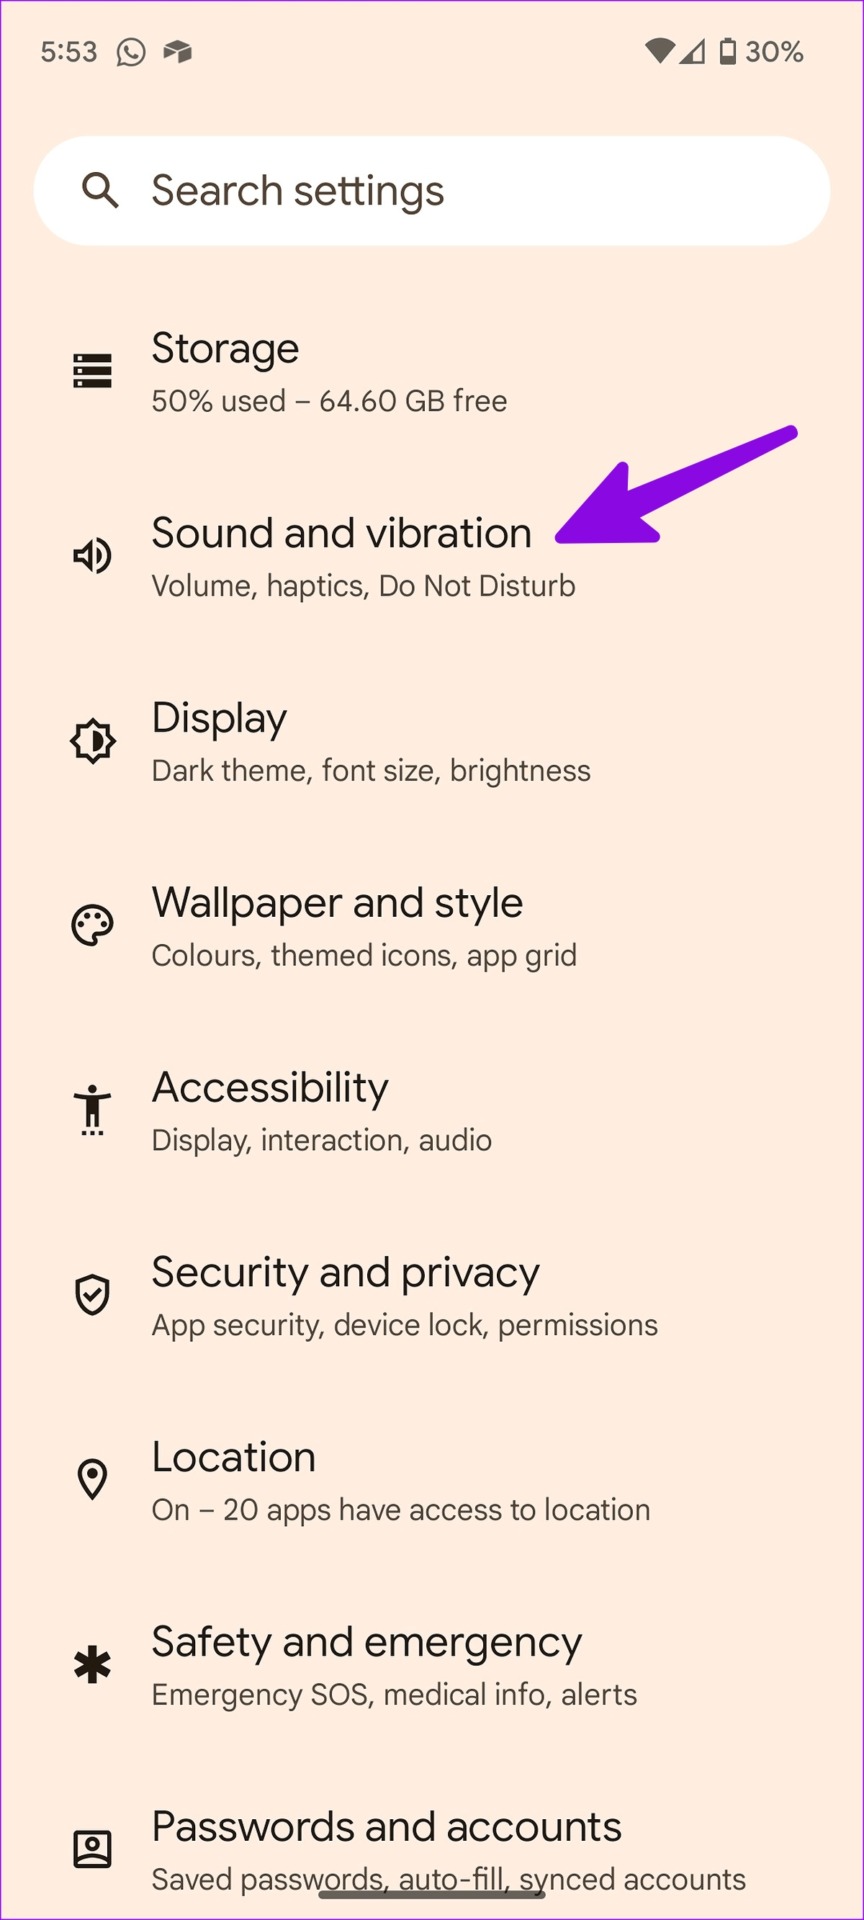 sound and vibration on Android